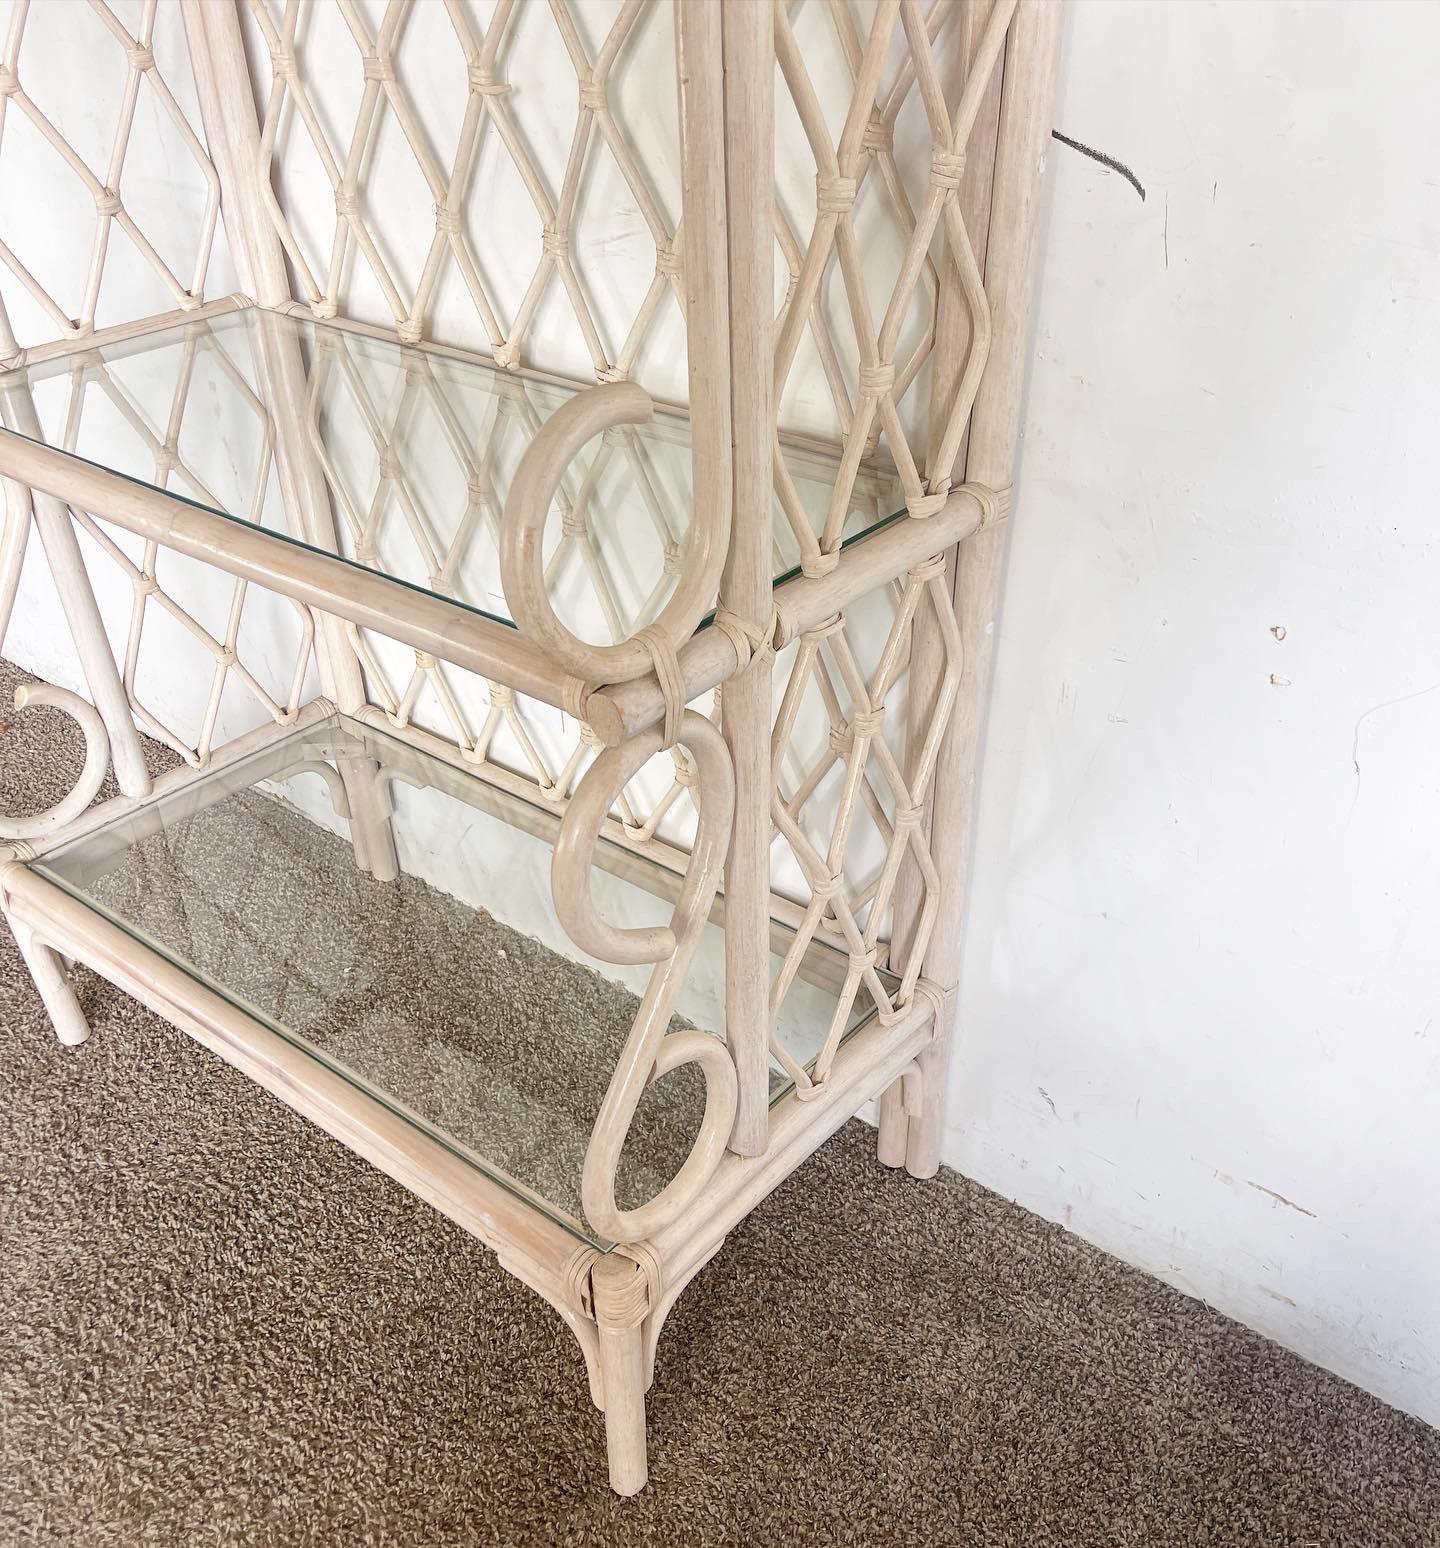 Late 20th Century Boho Chic Bamboo Rattan Whitewash Bakers Rack/Etagere For Sale